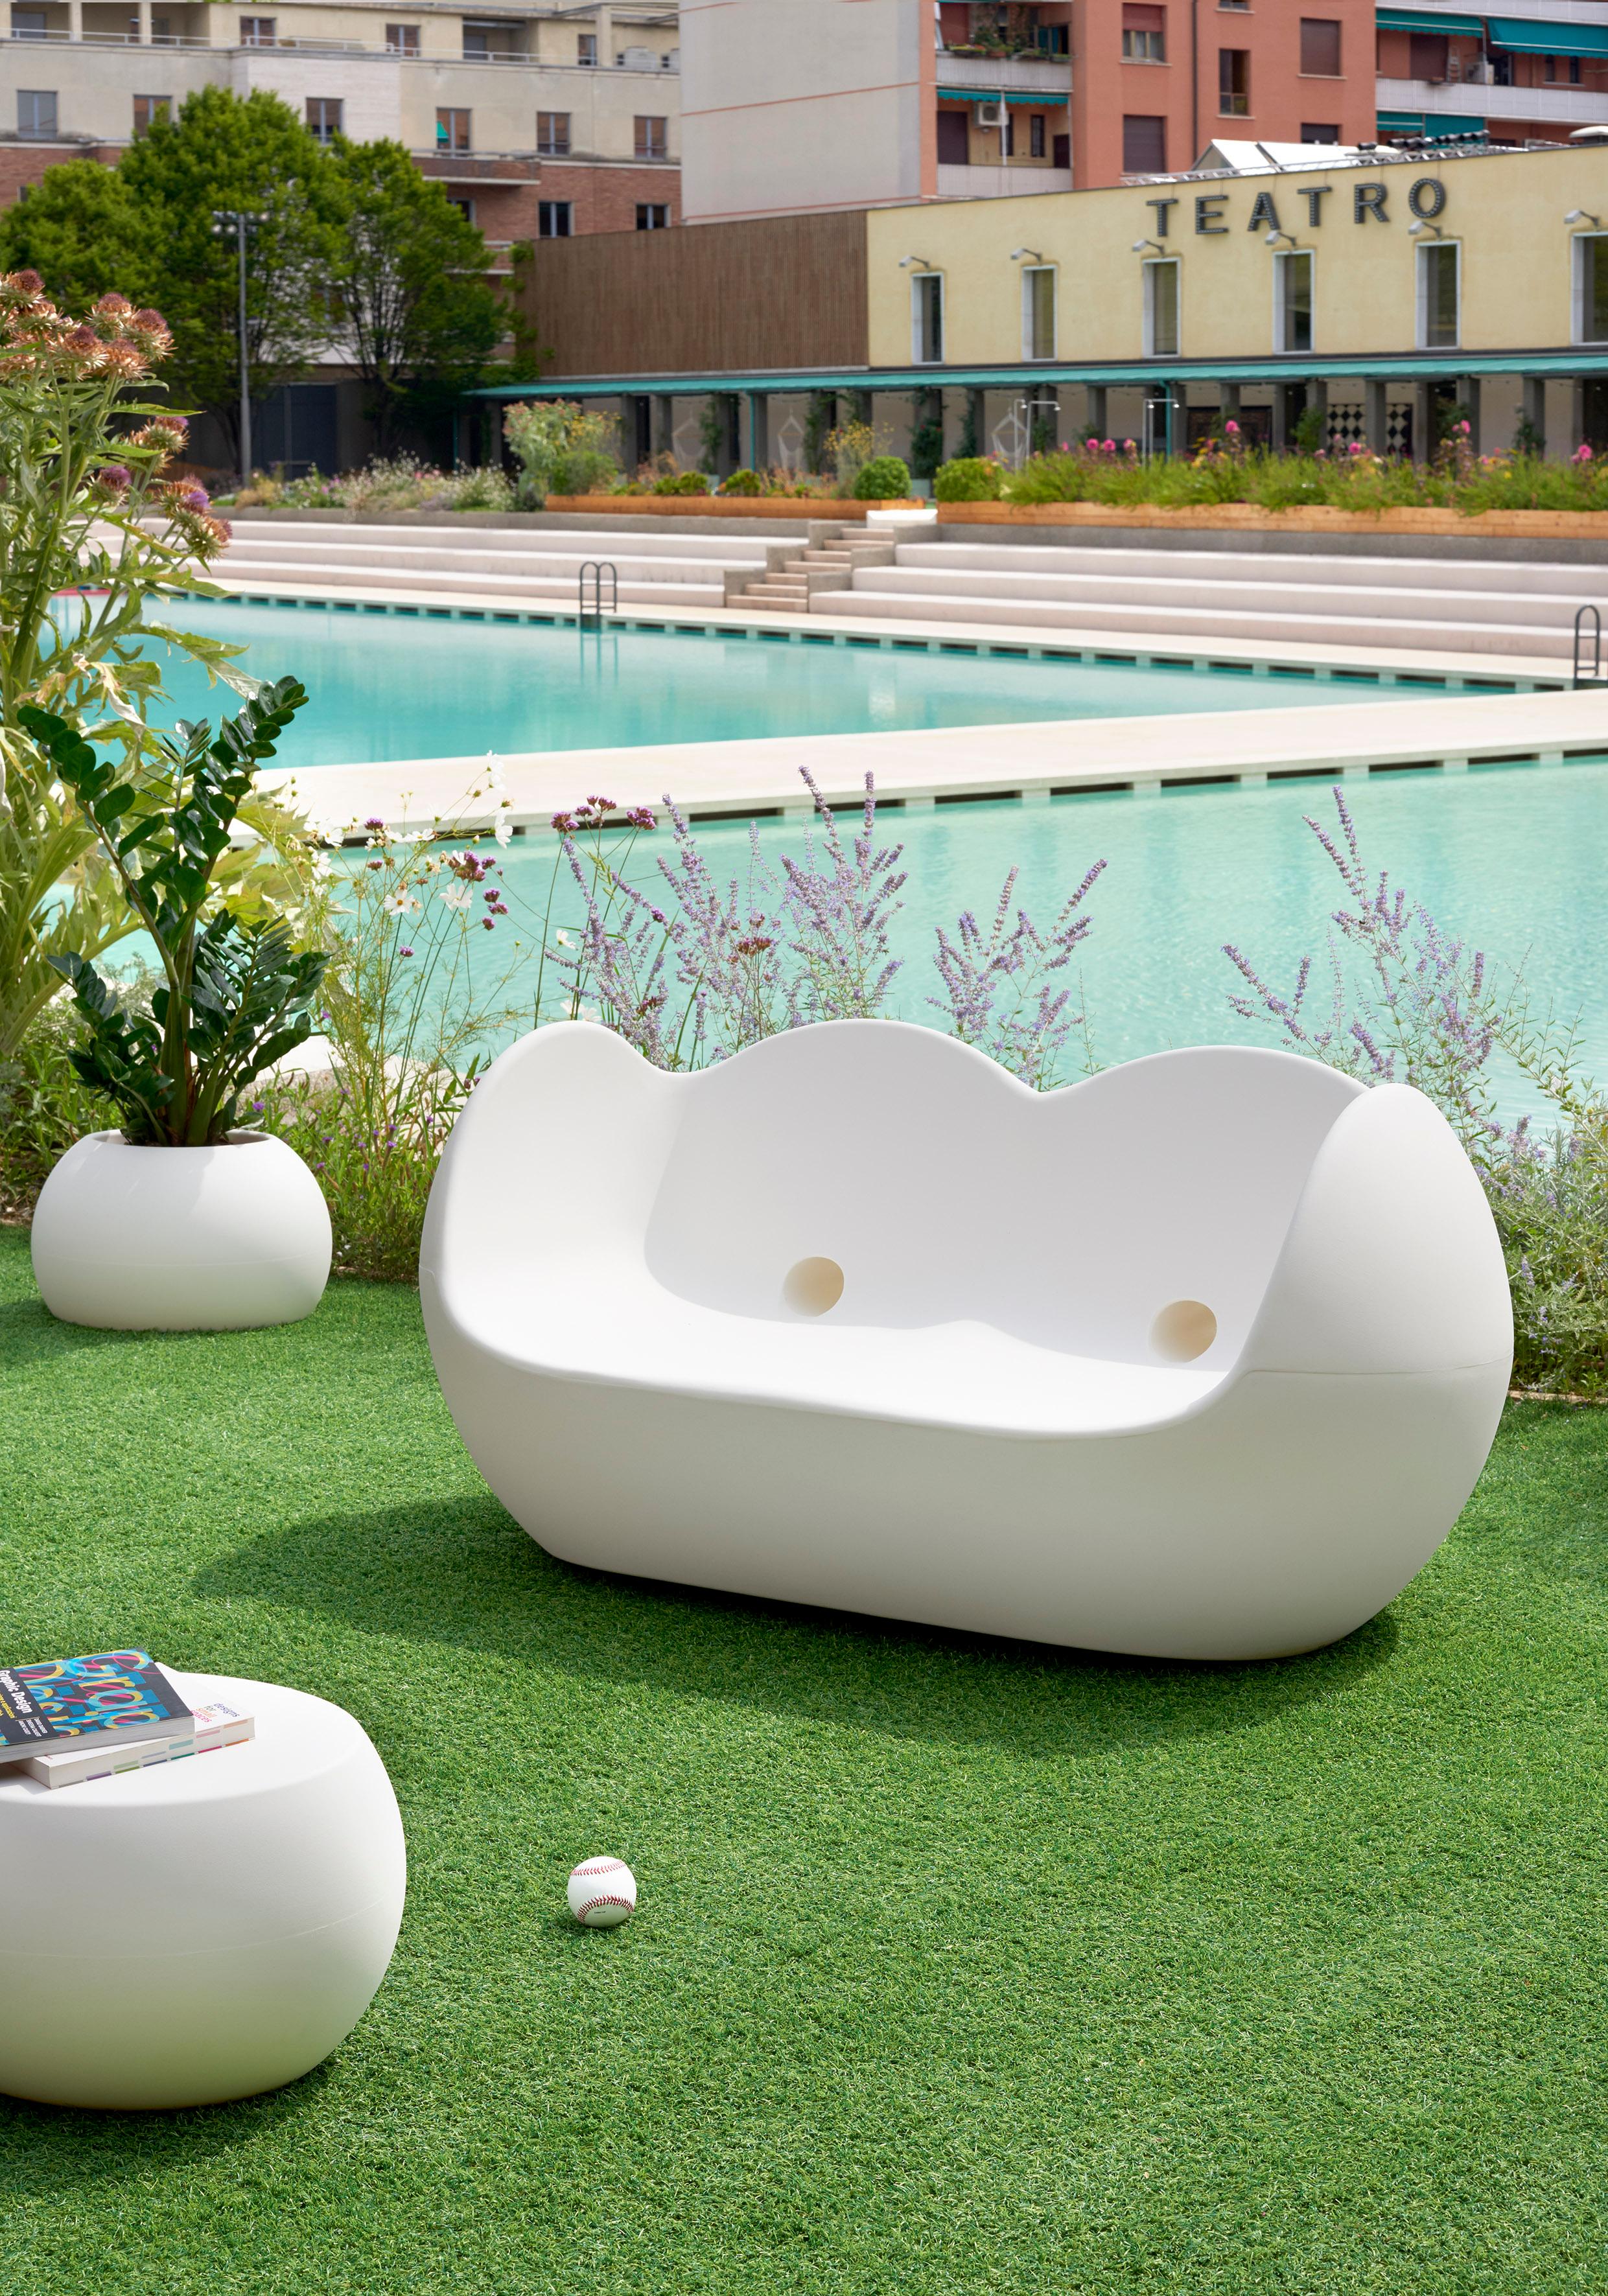 Saffron Yellow Blossy Rocking Sofa by Karim Rashid
Dimensions: D 85 x W 159 x H 75 cm. Seat Height: 34 cm.
Materials: Polyethylene.
Weight: 38 kg.

Available in different color options. This product is suitable for indoor and outdoor use. Please